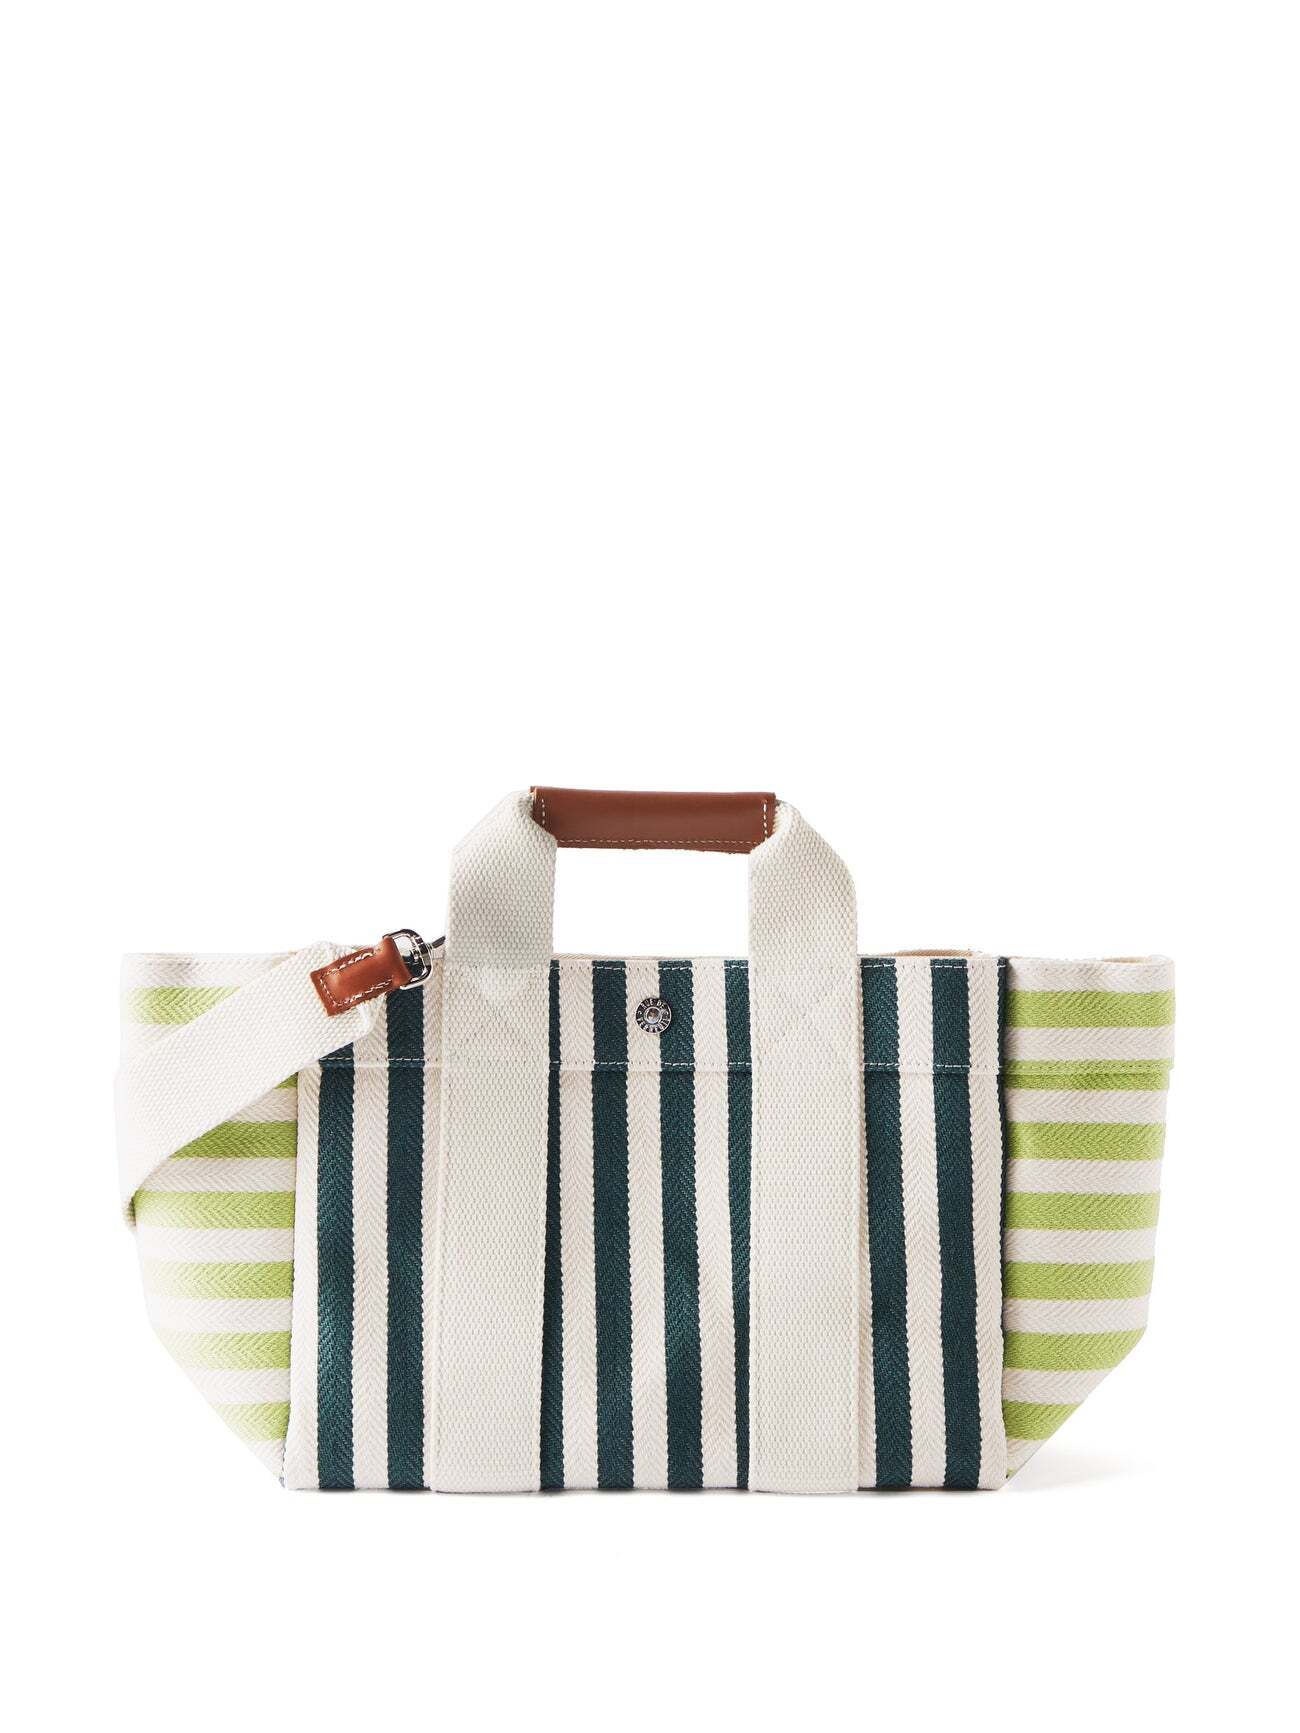 Rue De Verneuil - Parcours S Striped Canvas Tote Bag - Womens - Green Multi